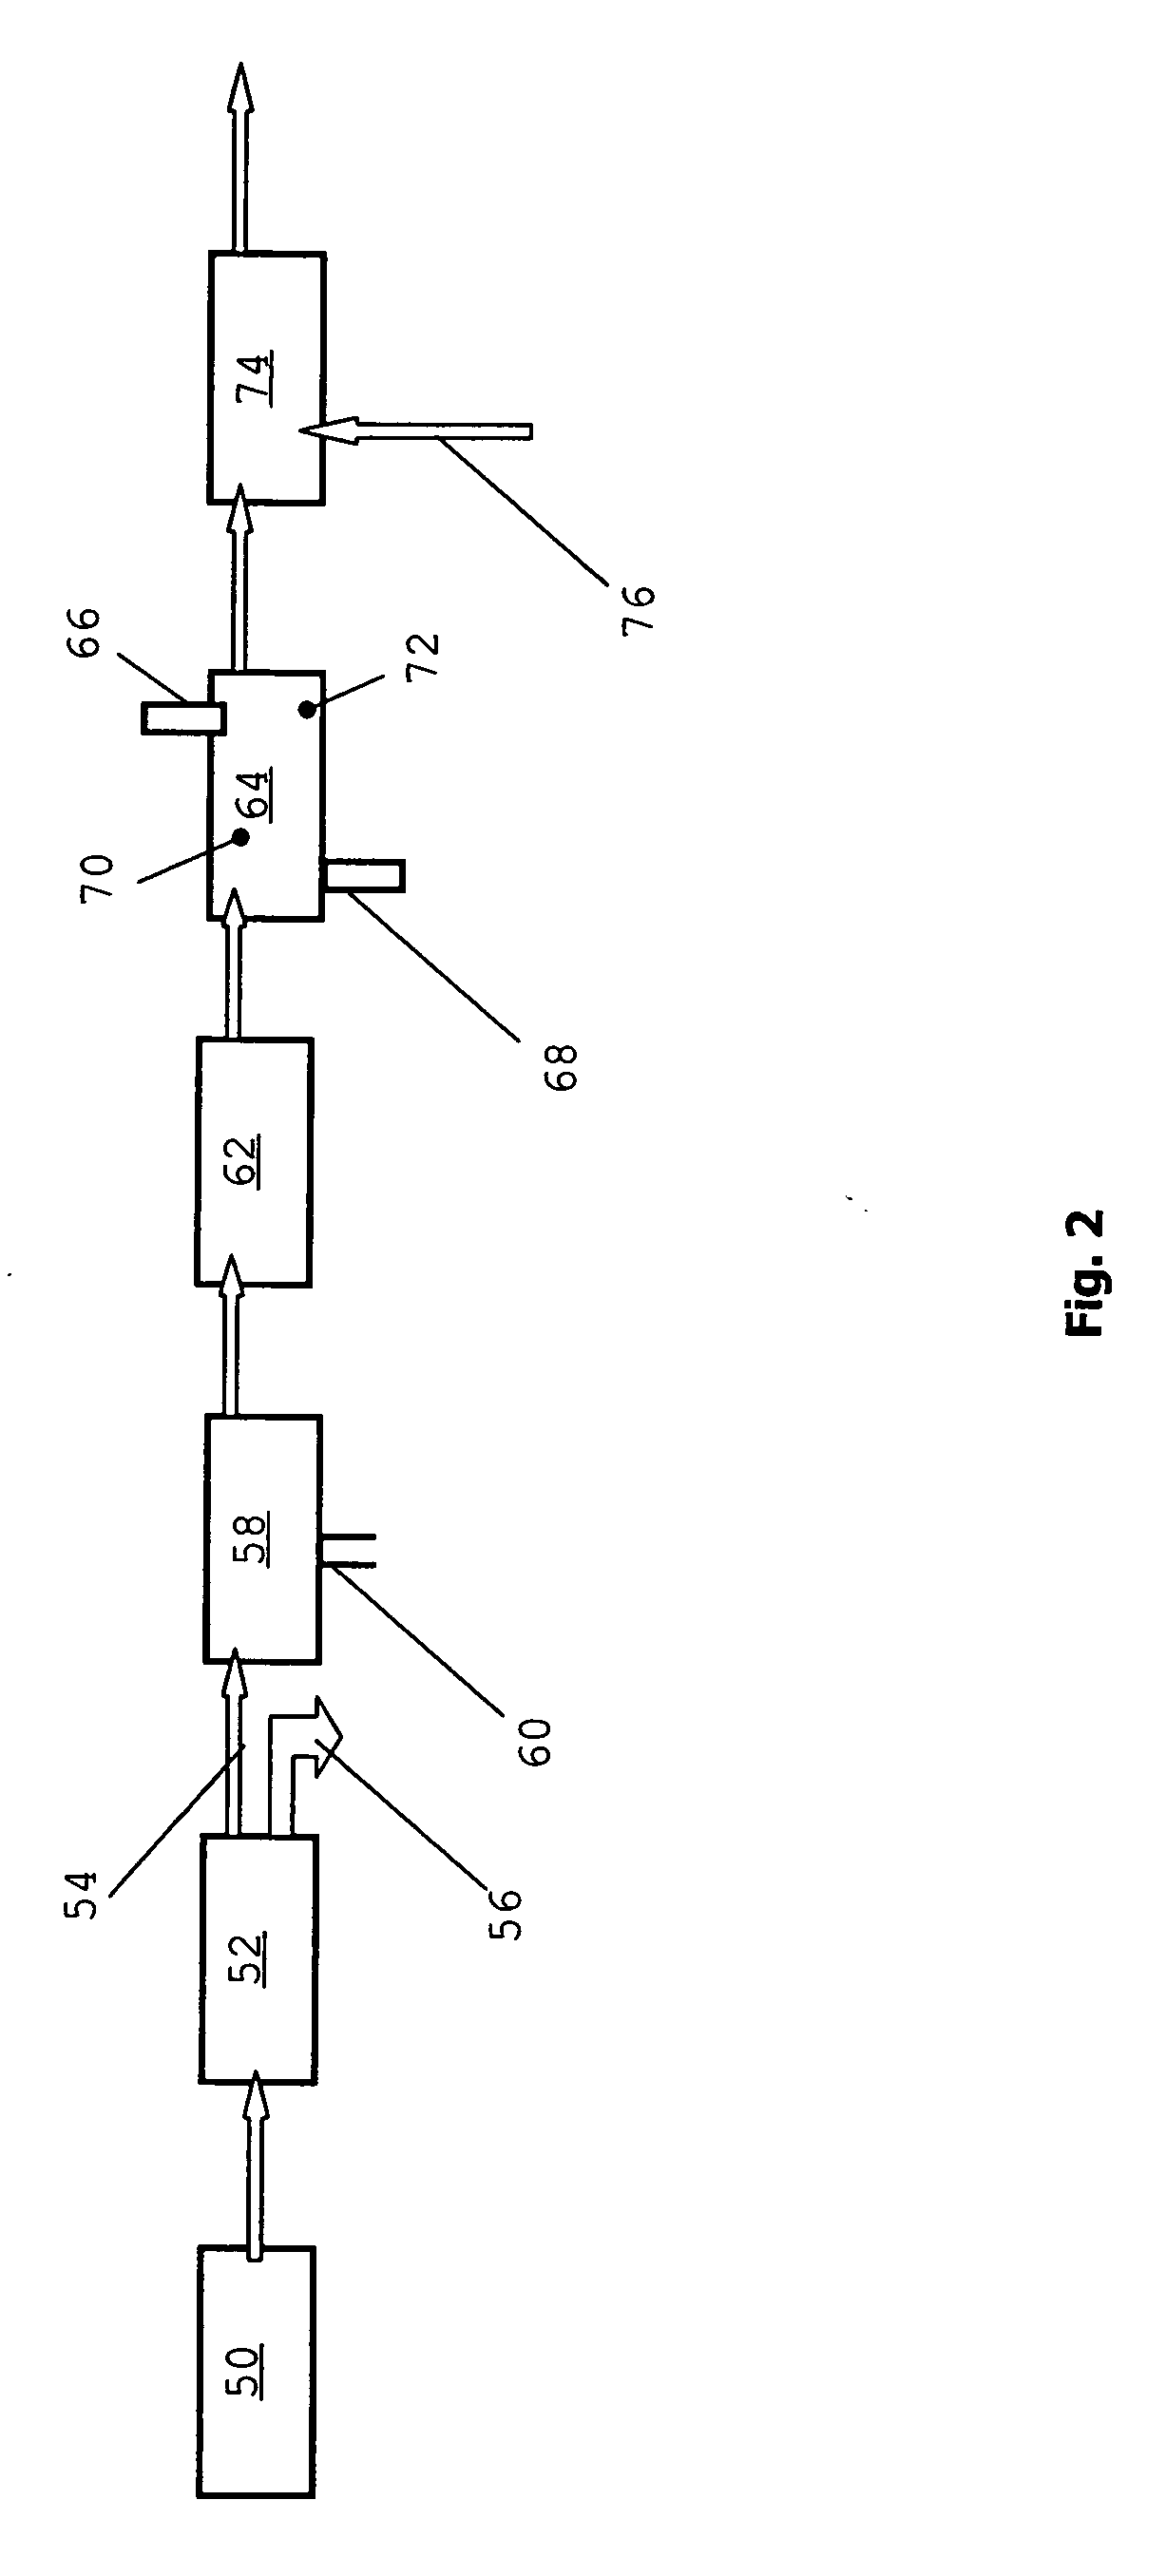 Method and apparatus for fabrication of fuels from pressed biomass and use thereof